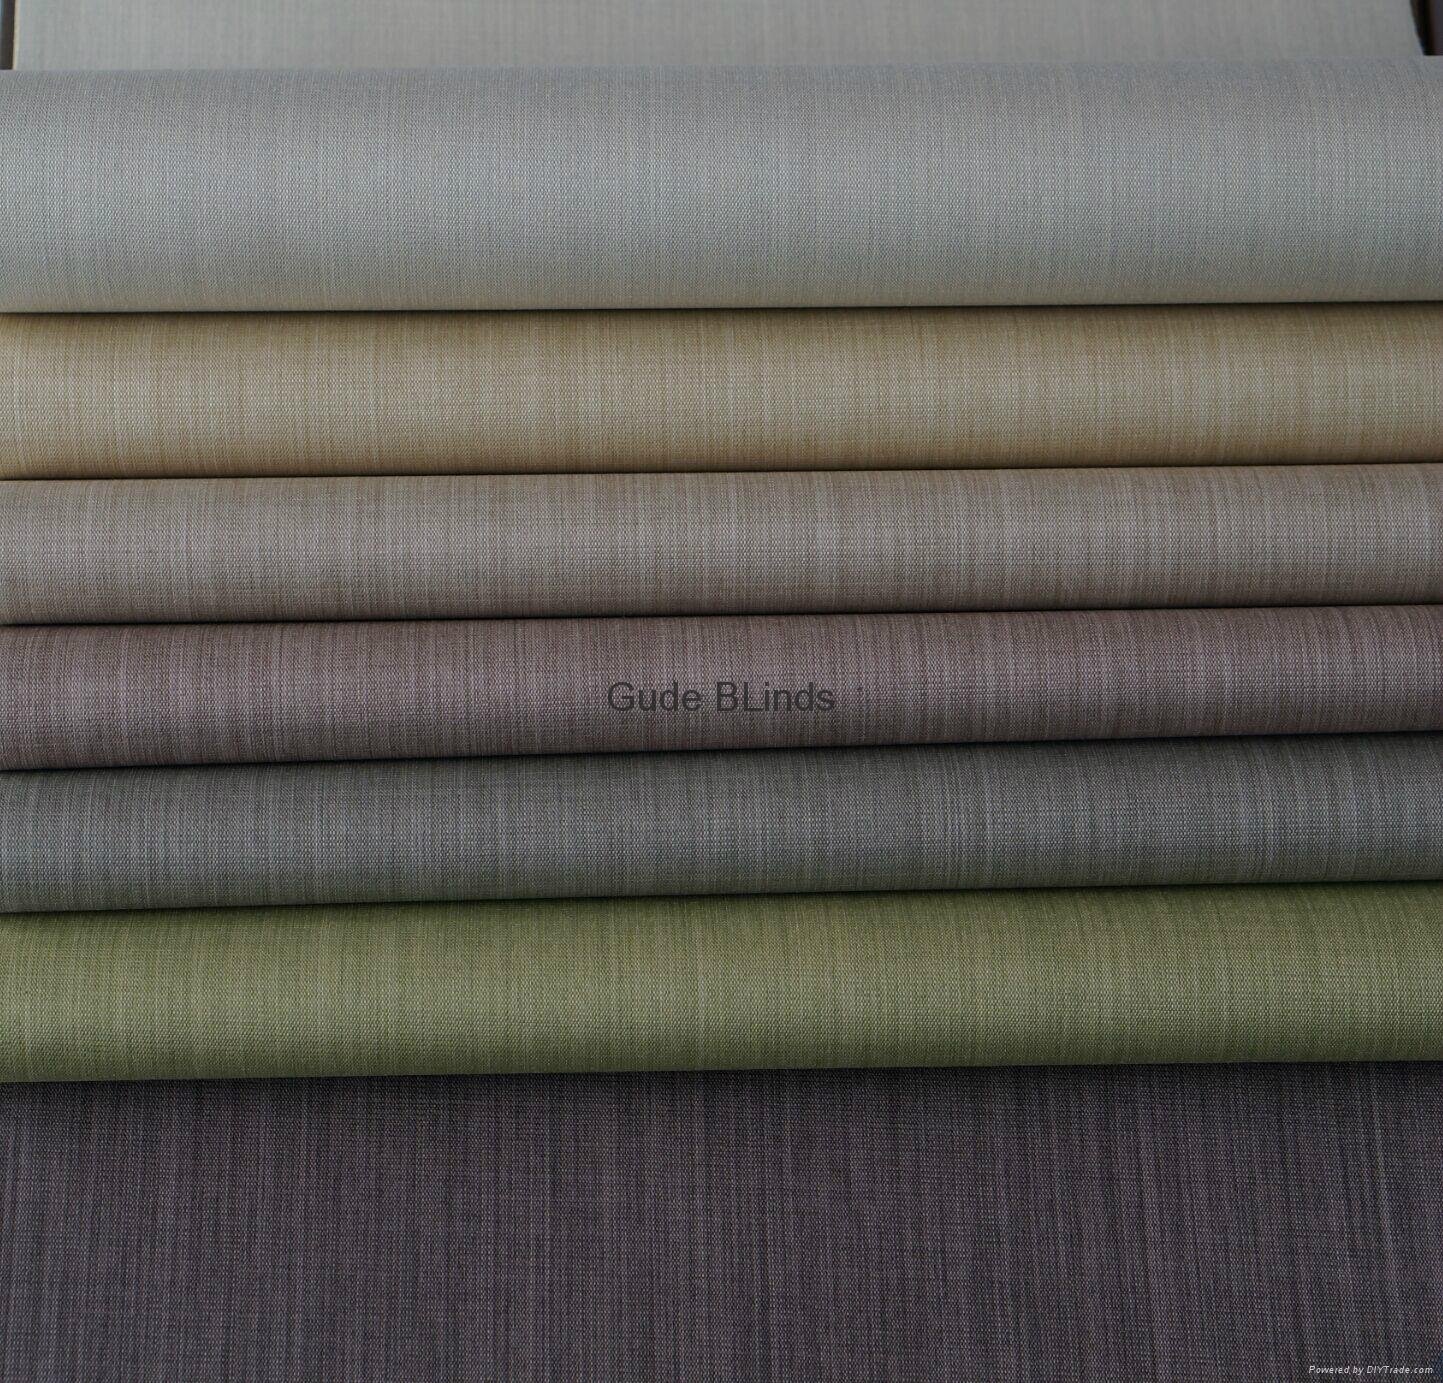 Roller Blinds Fabric 410 3